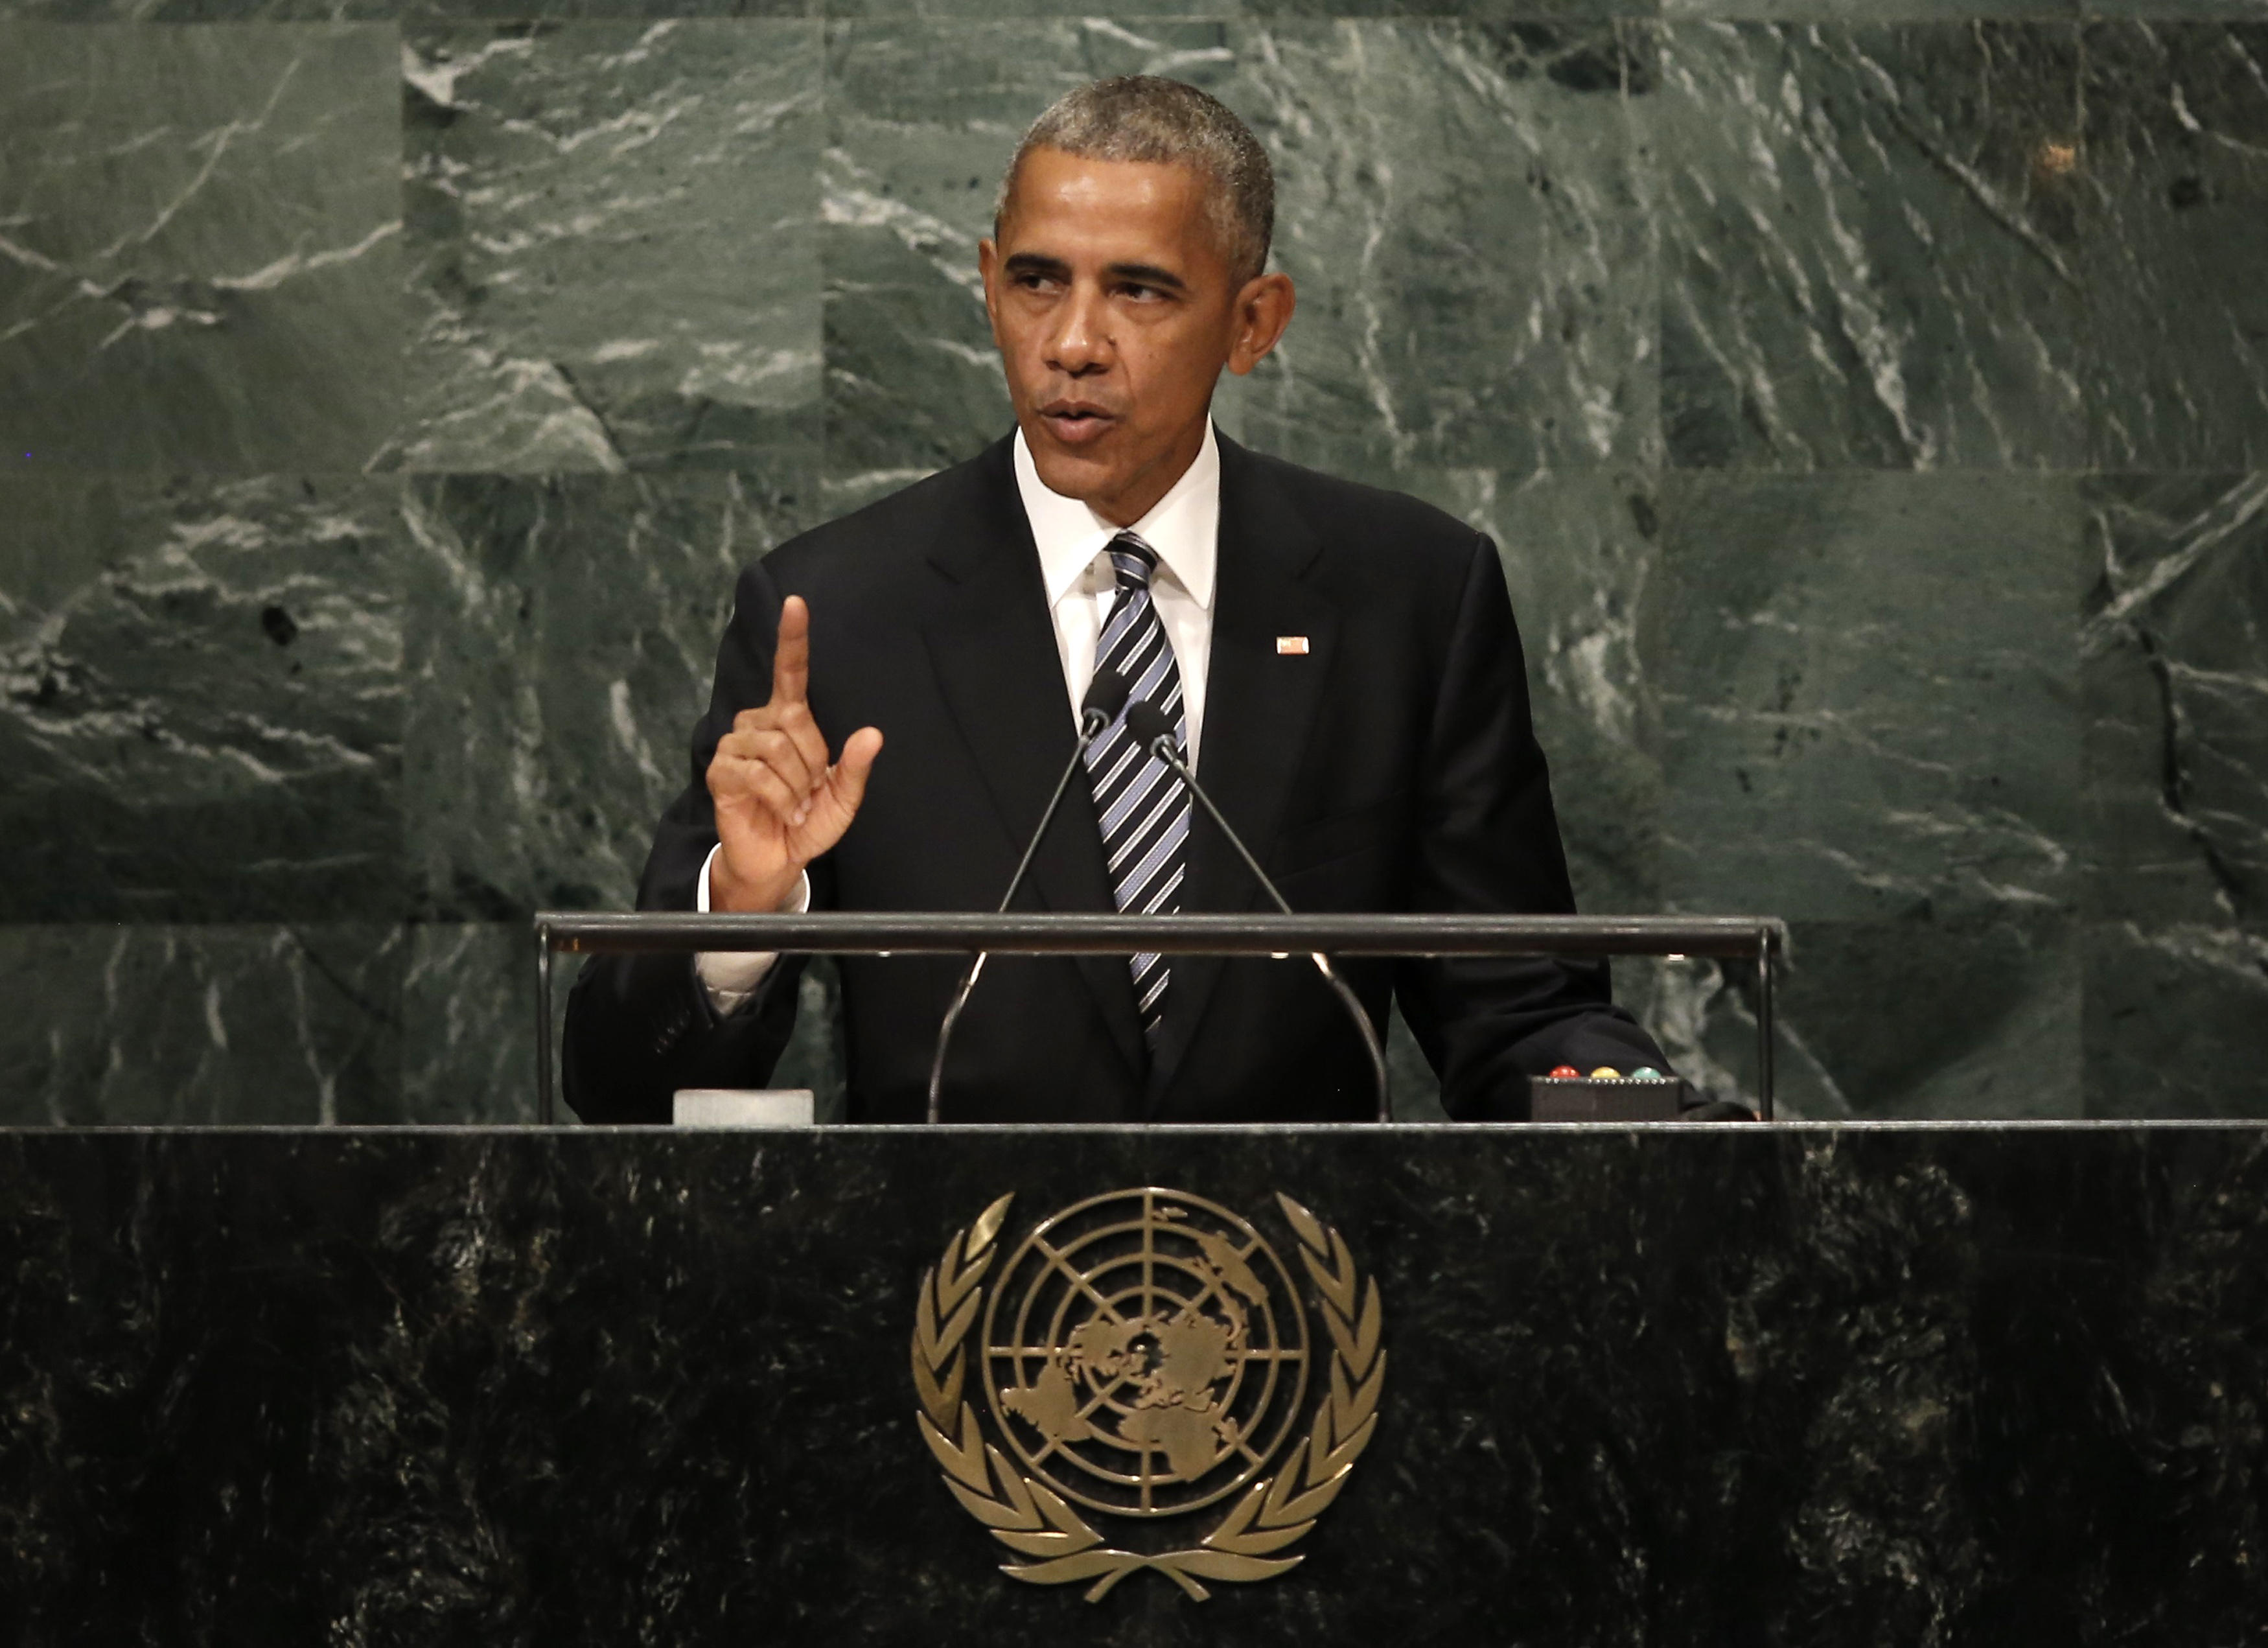 Obama delivers his final speech to the UN CBS News